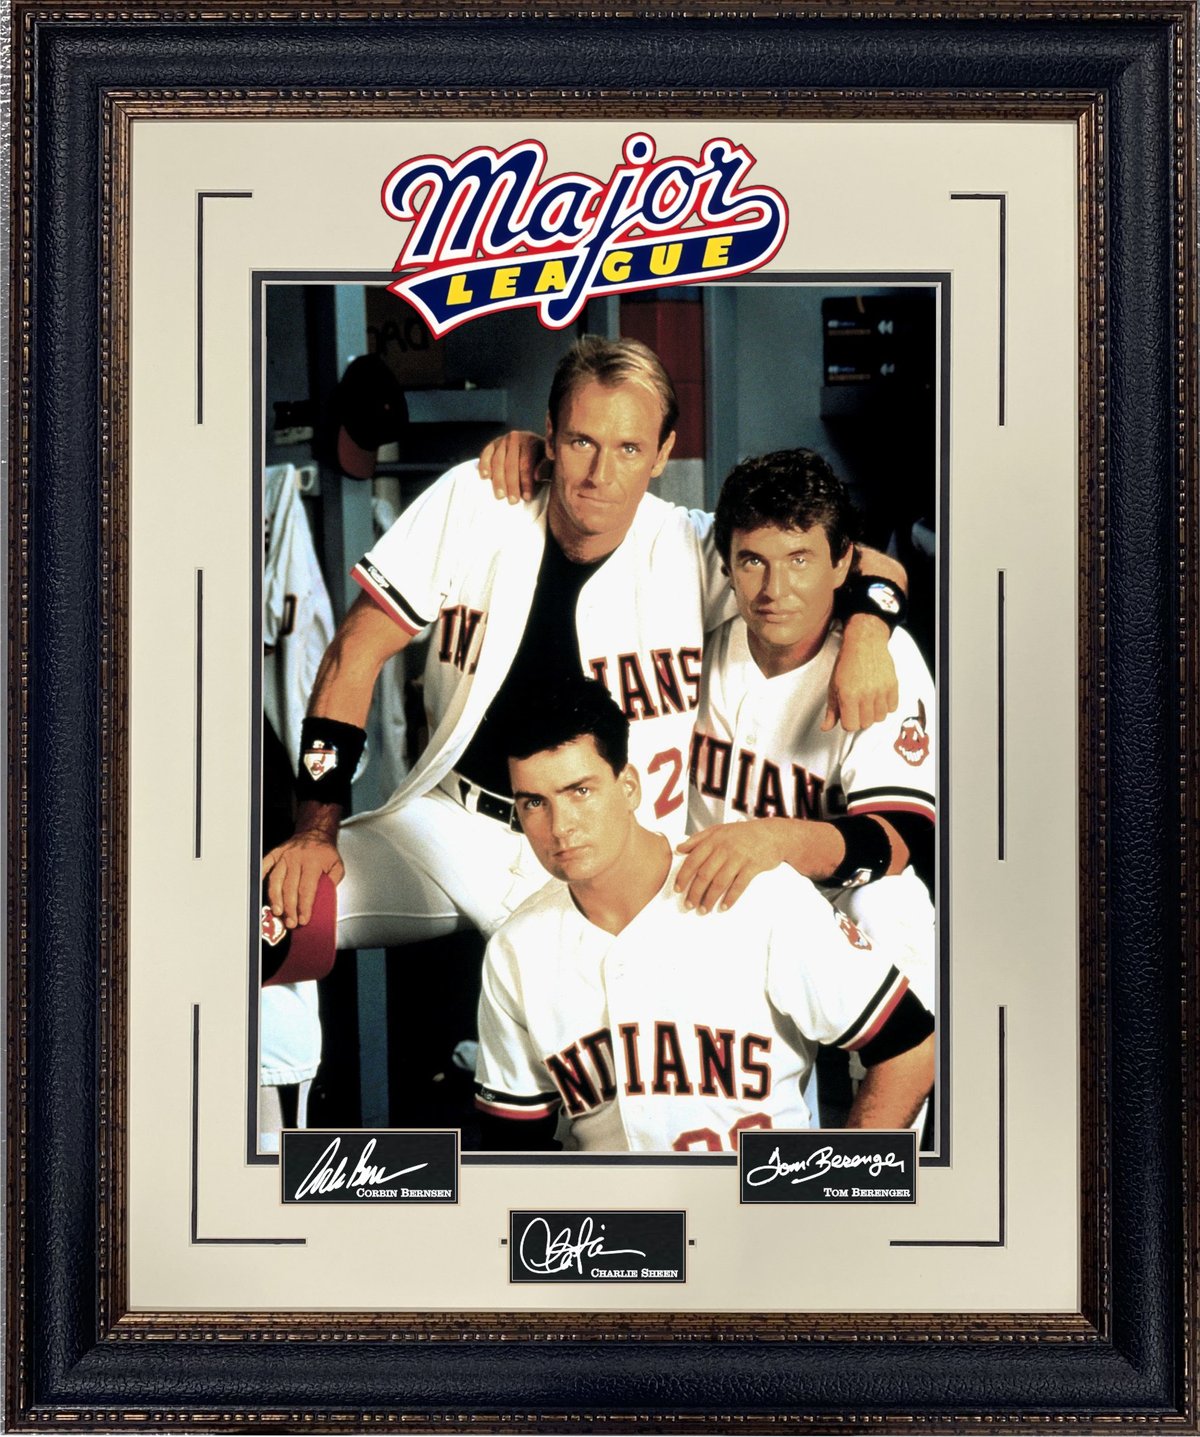 Major League Photo with Laser signatures framed